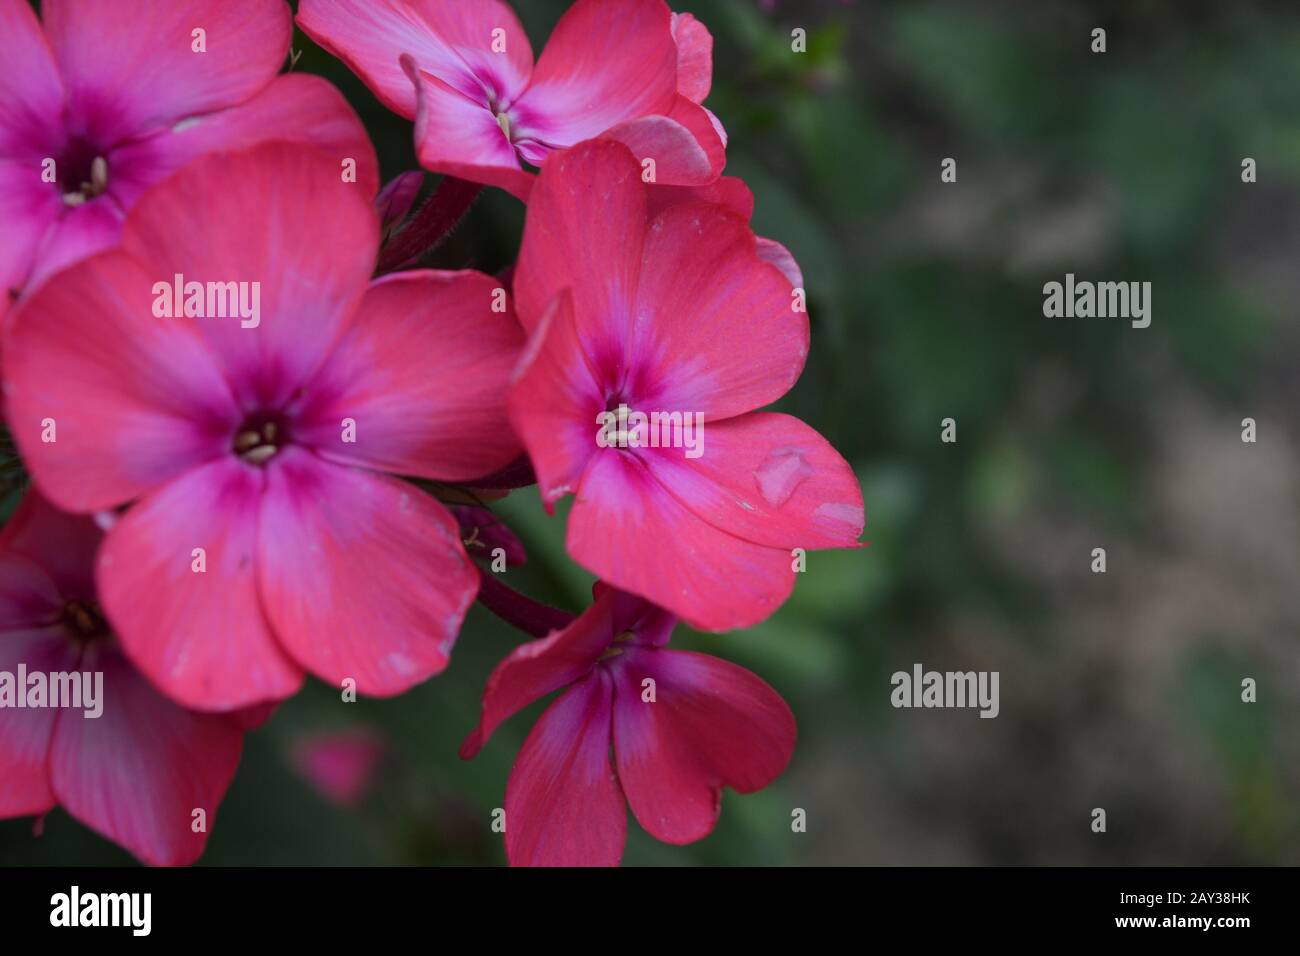 Phlox. Polemoniaceae. Beautiful inflorescence. Flowers pink. Nice smell. Growing flowers. Flowerbed. Garden. On blurred background. Close-up. Horizont Stock Photo